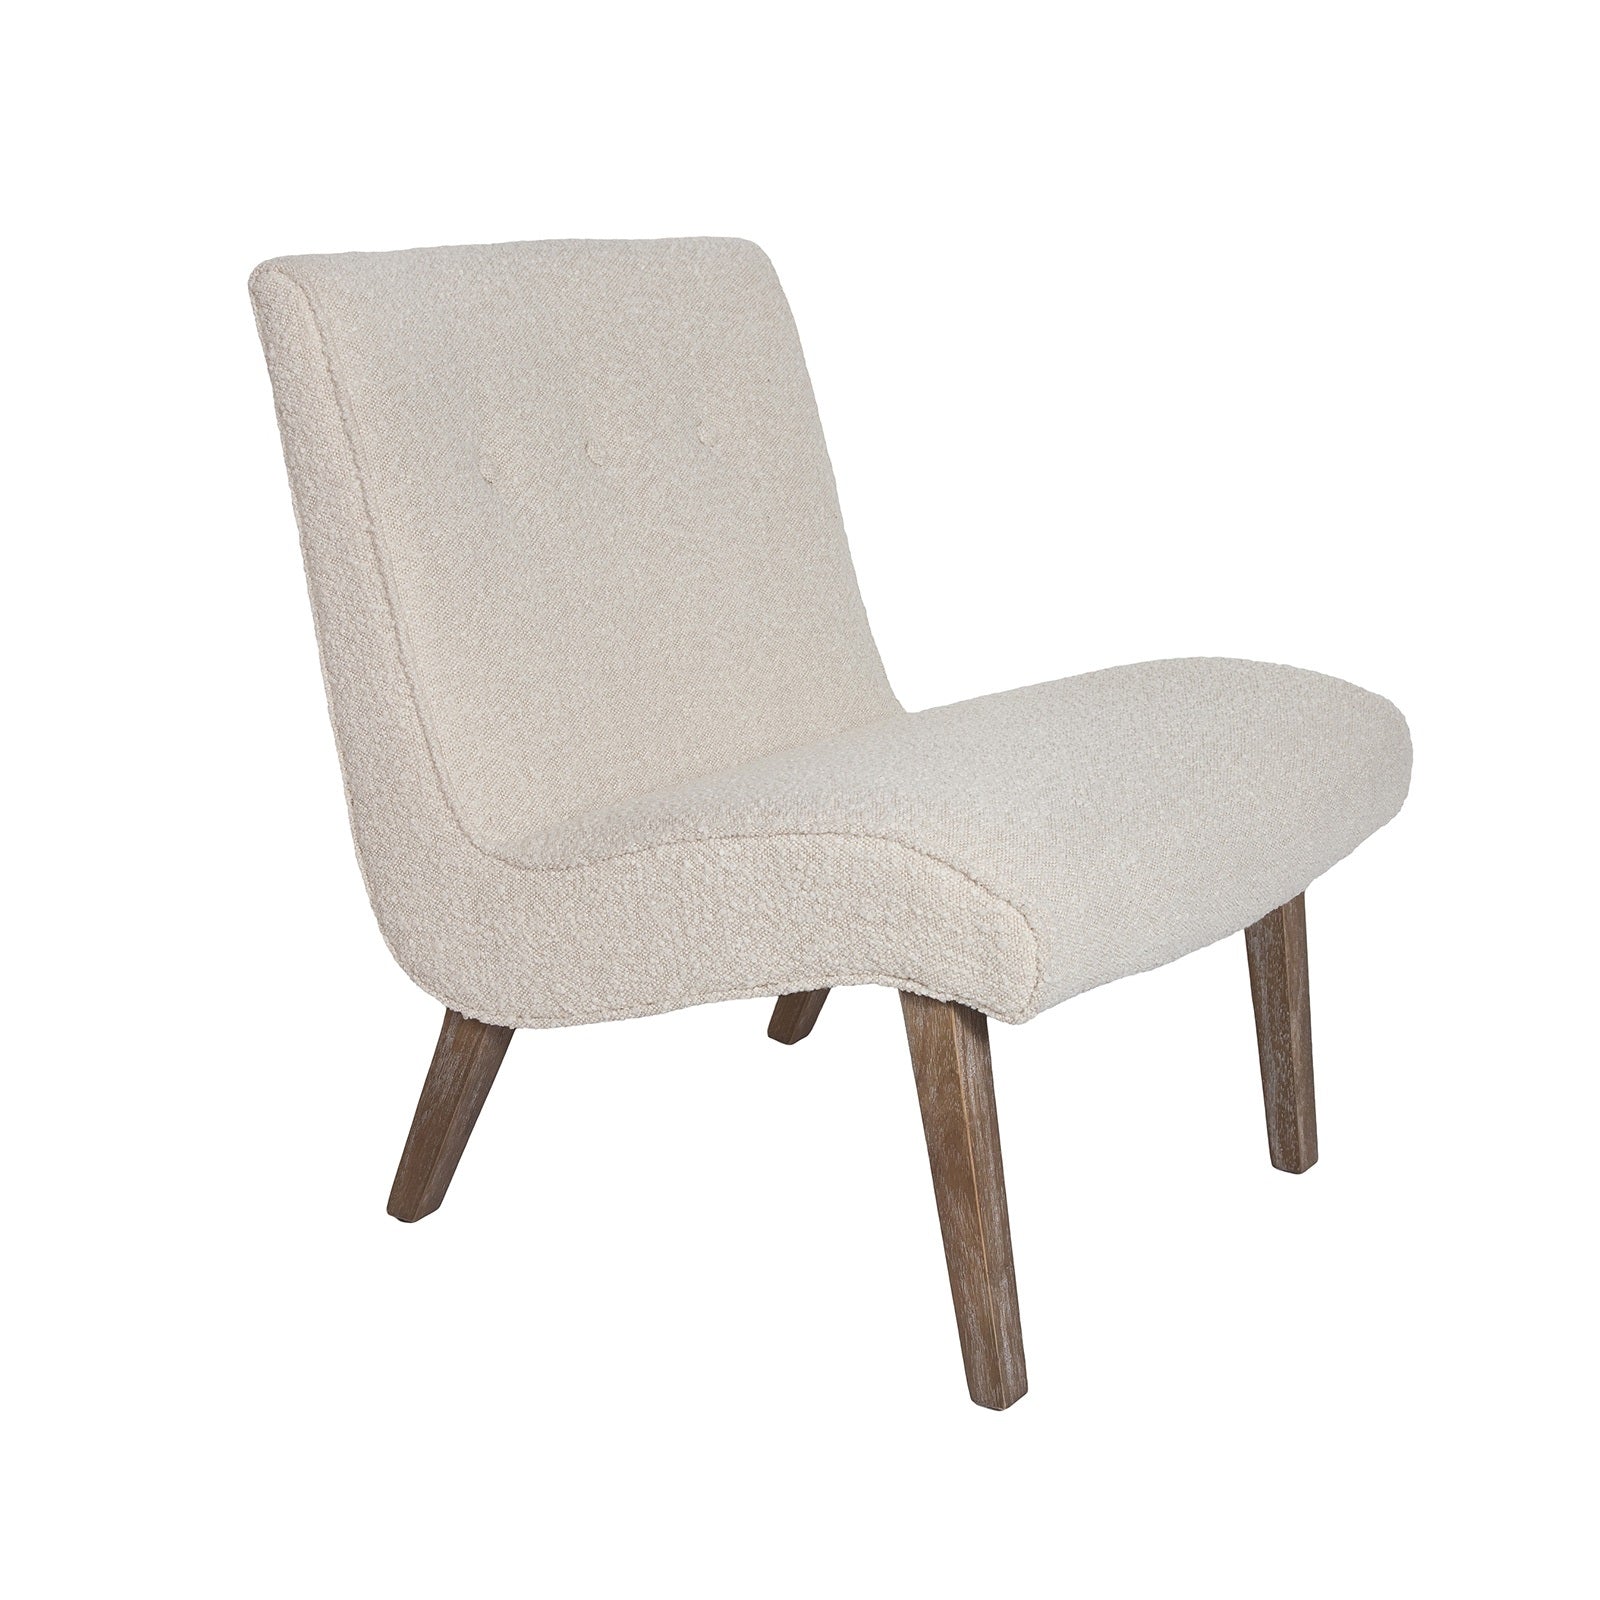 Fifi Occasional Chair – Cream Boucle